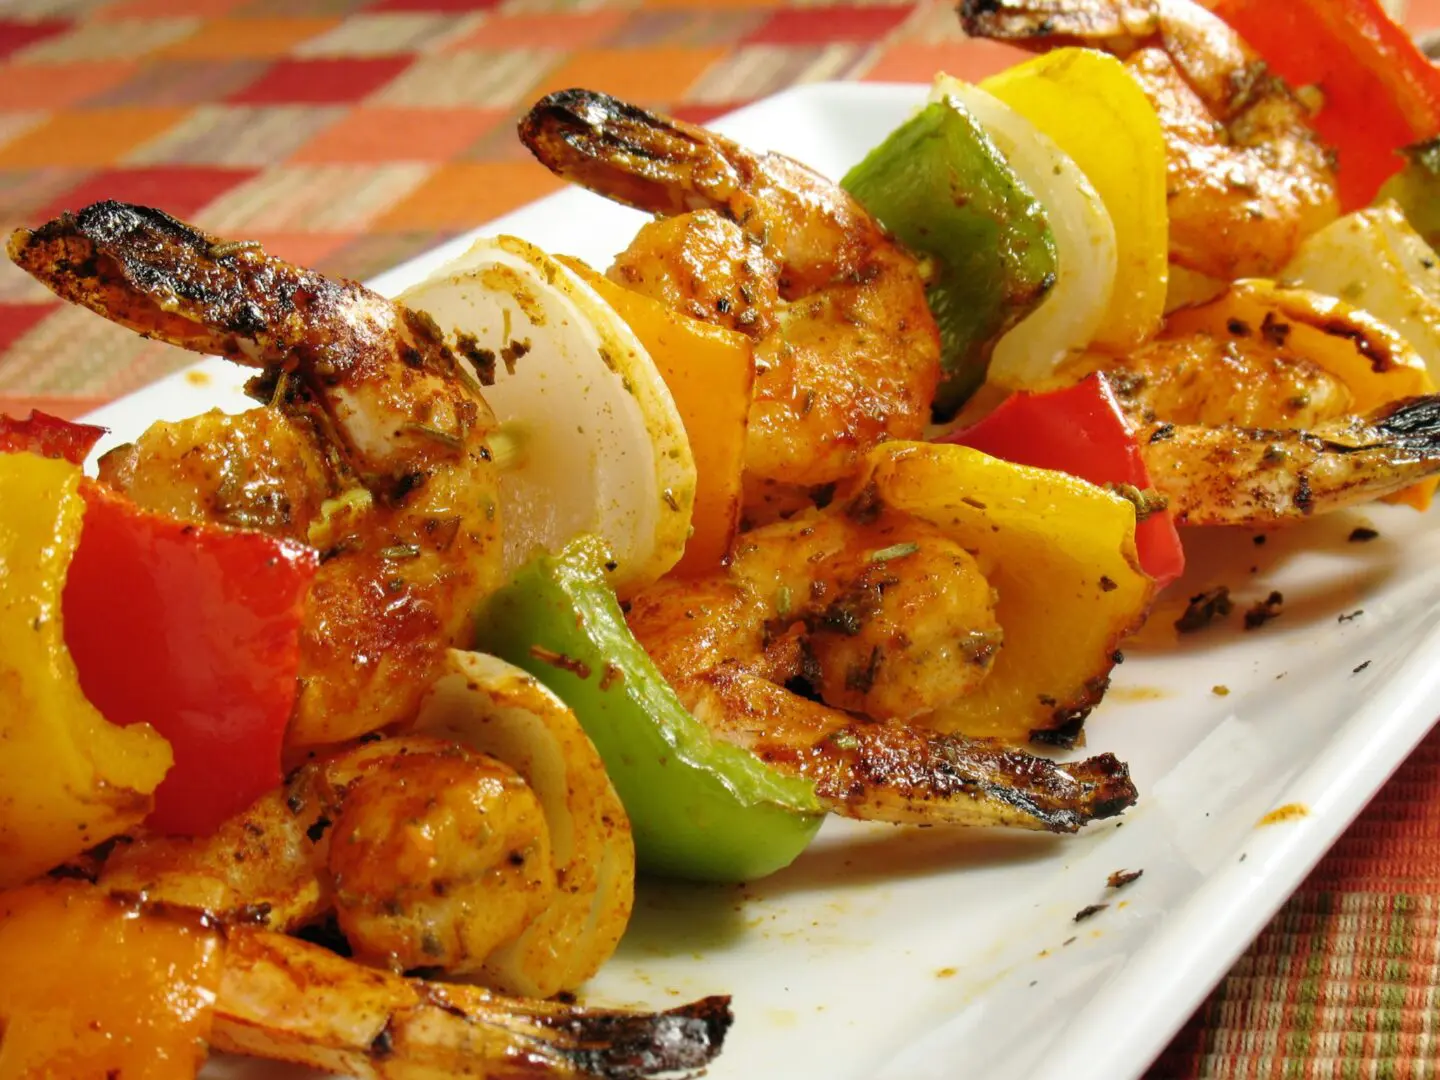 Shrimp skewers on a white plate.